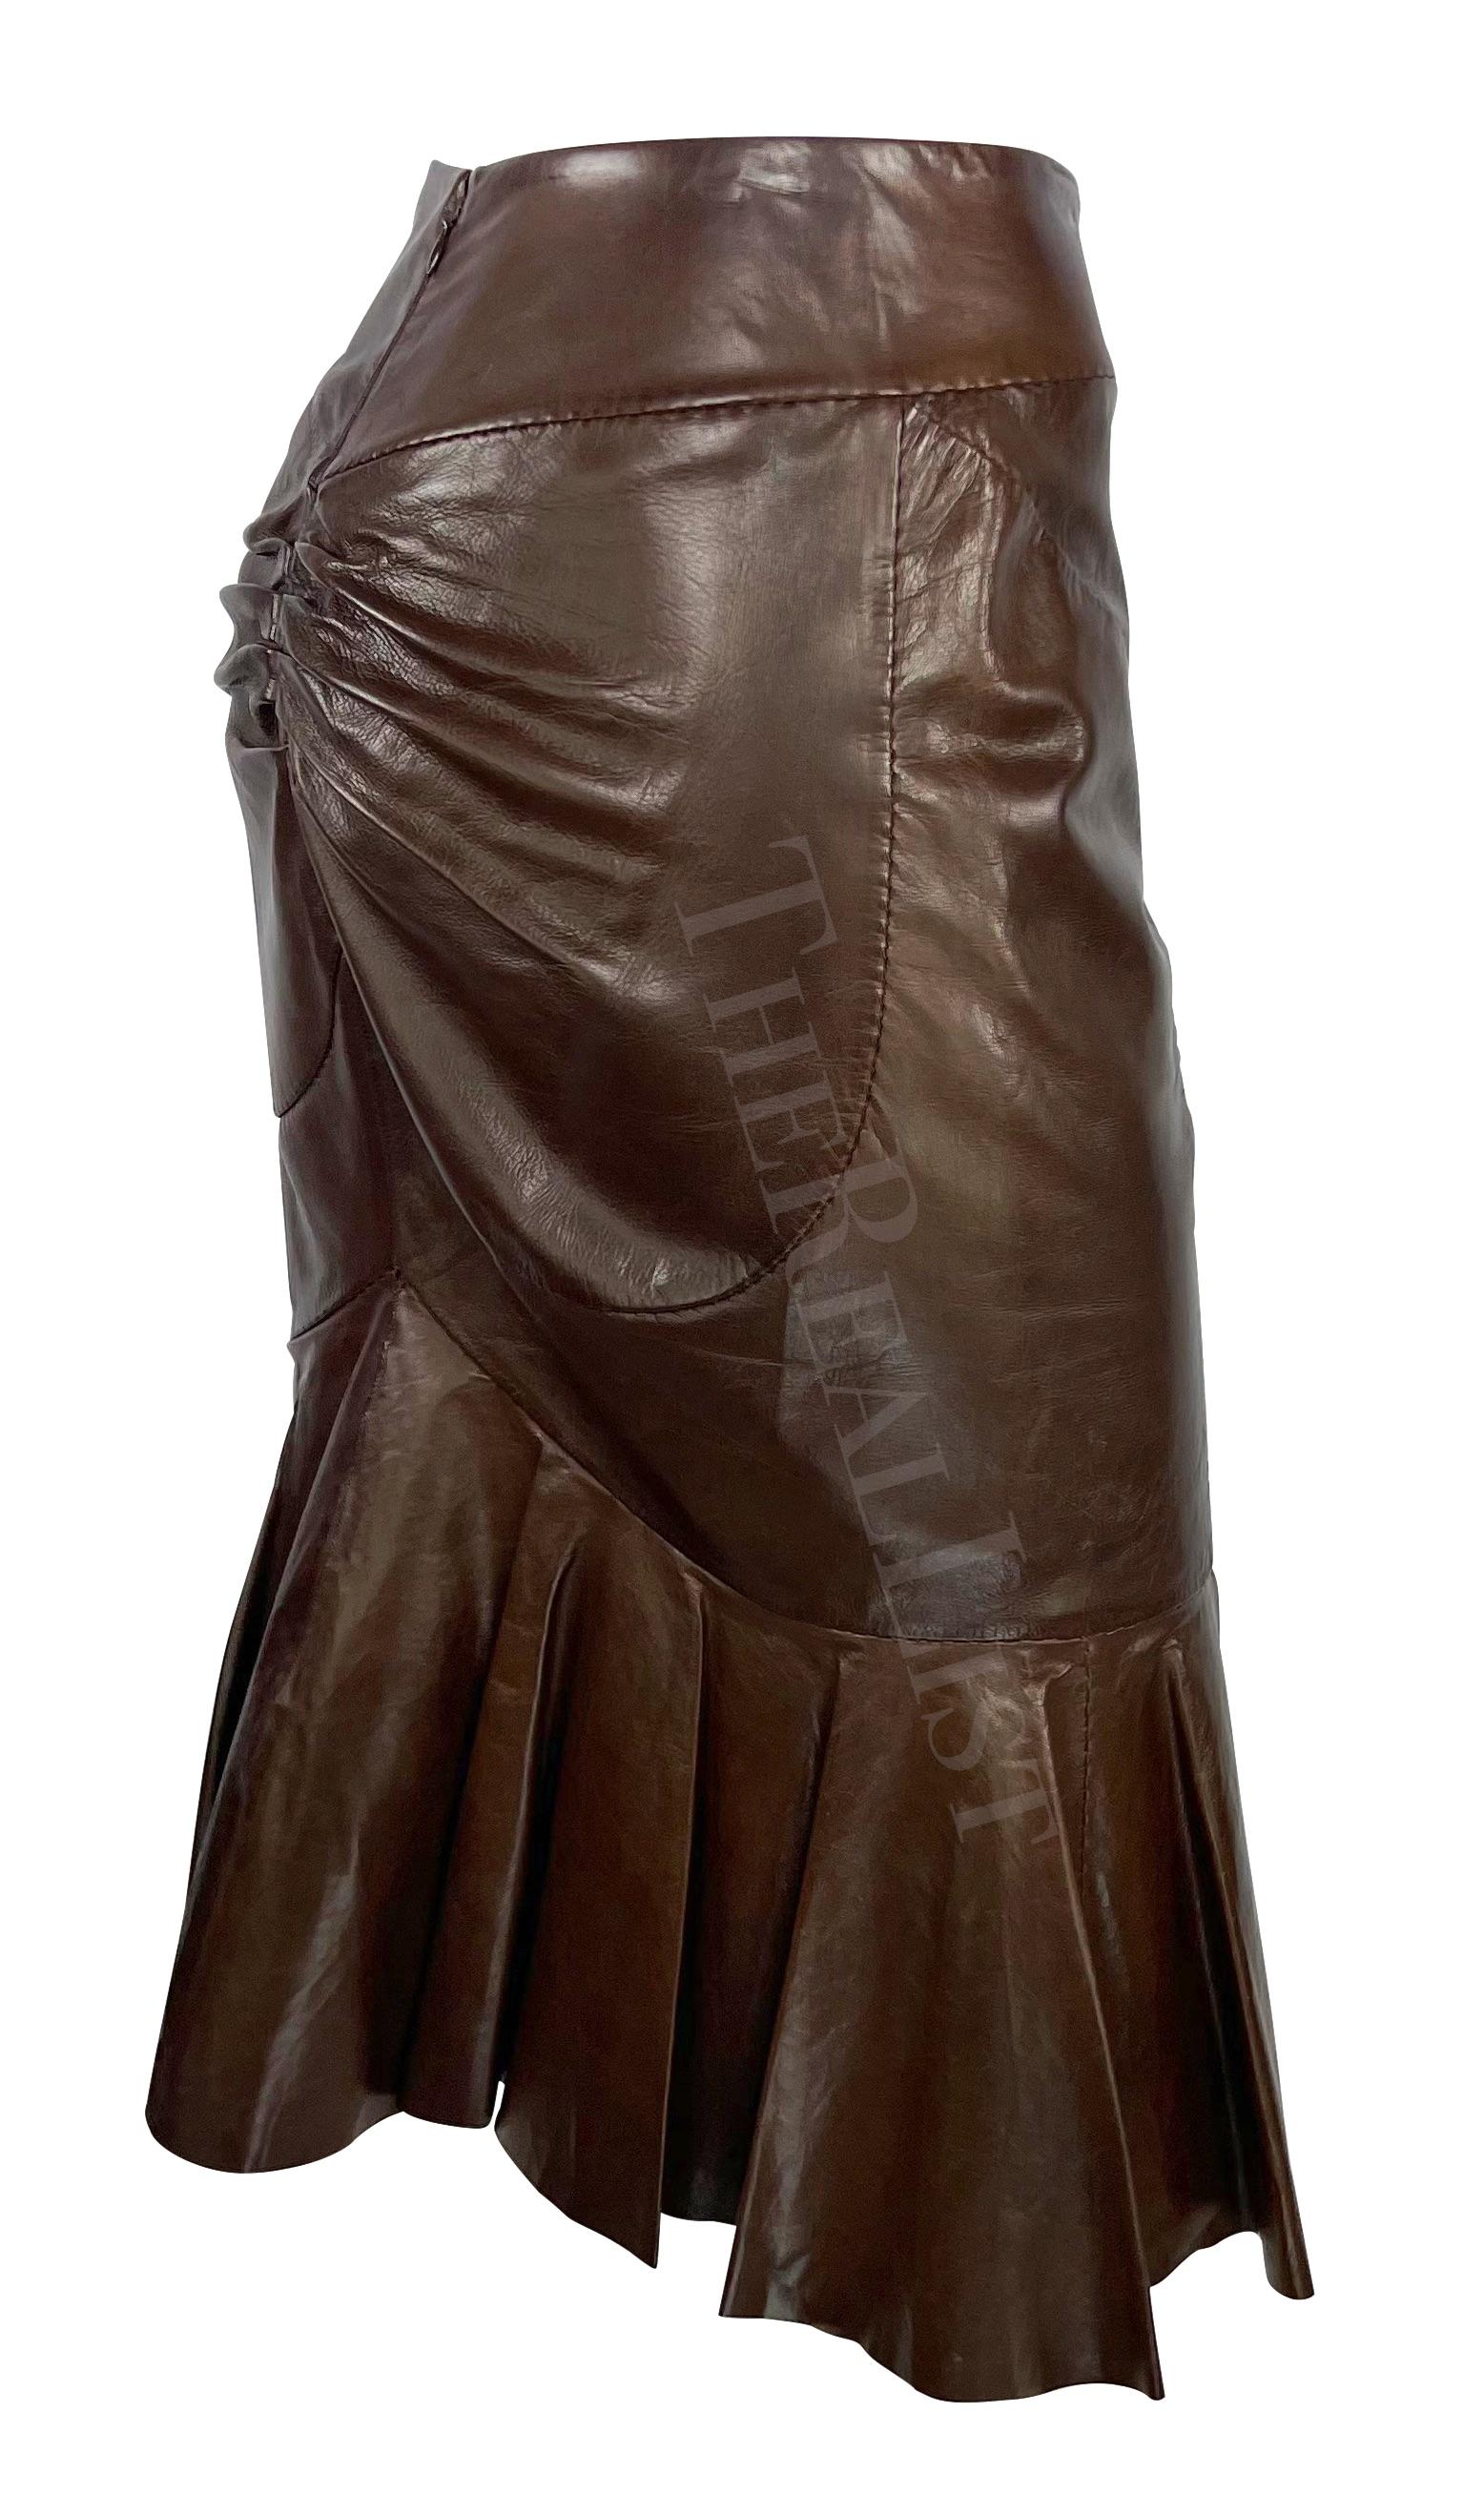 S/S 2003 Yves Saint Laurent by Tom Ford Anatomic Brown Leather Ruffle Skirt For Sale 3